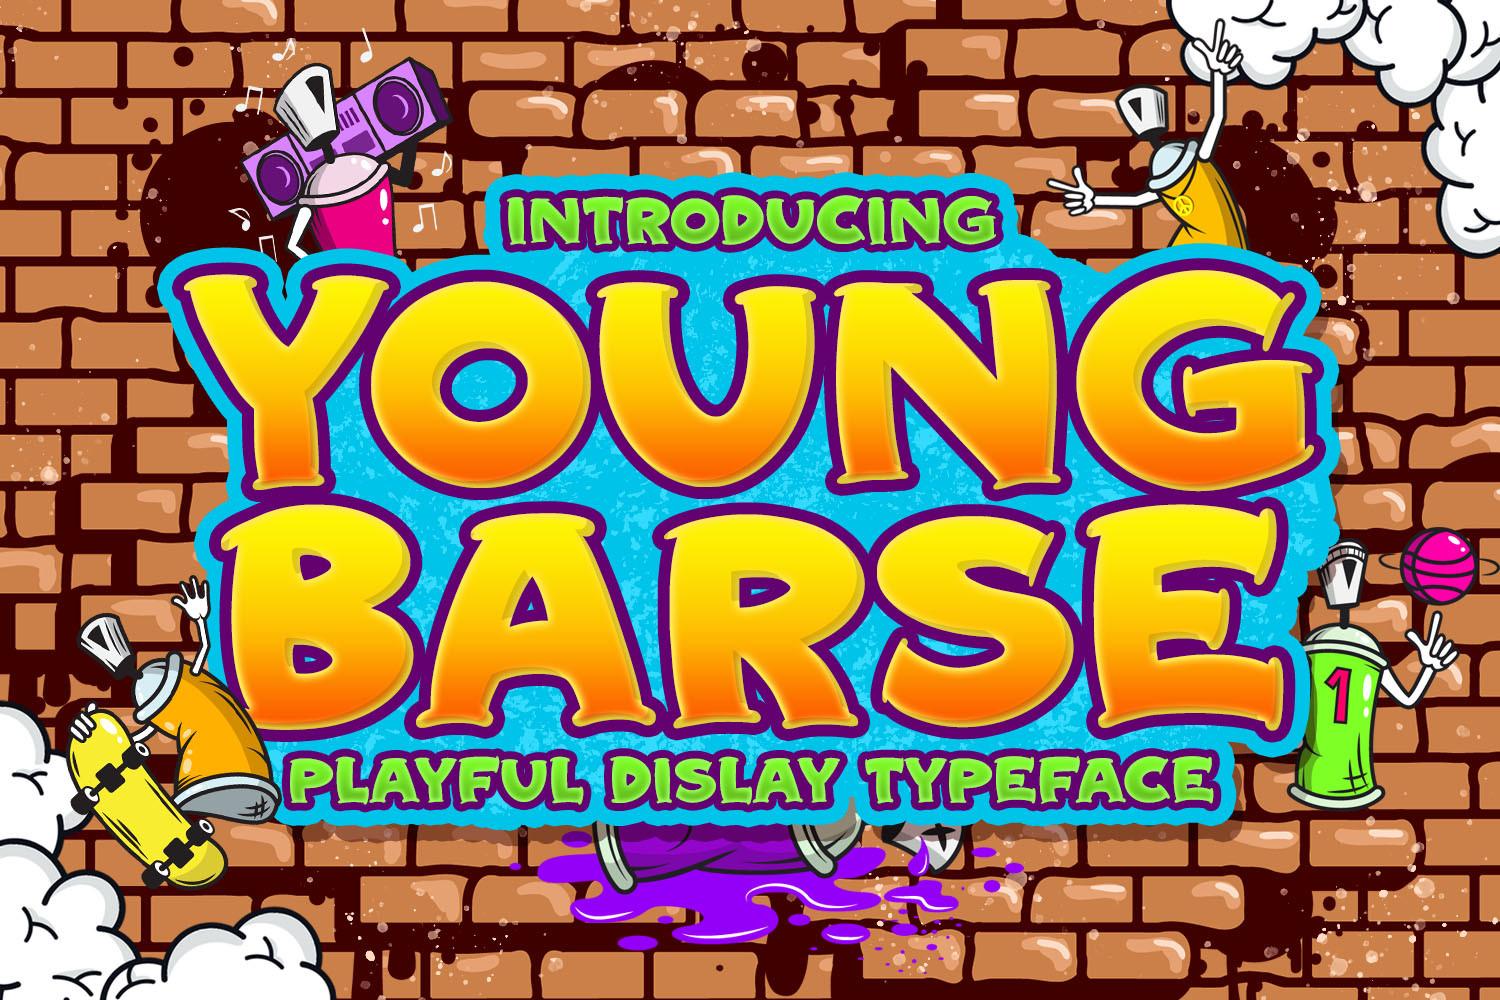 Young Barse Font